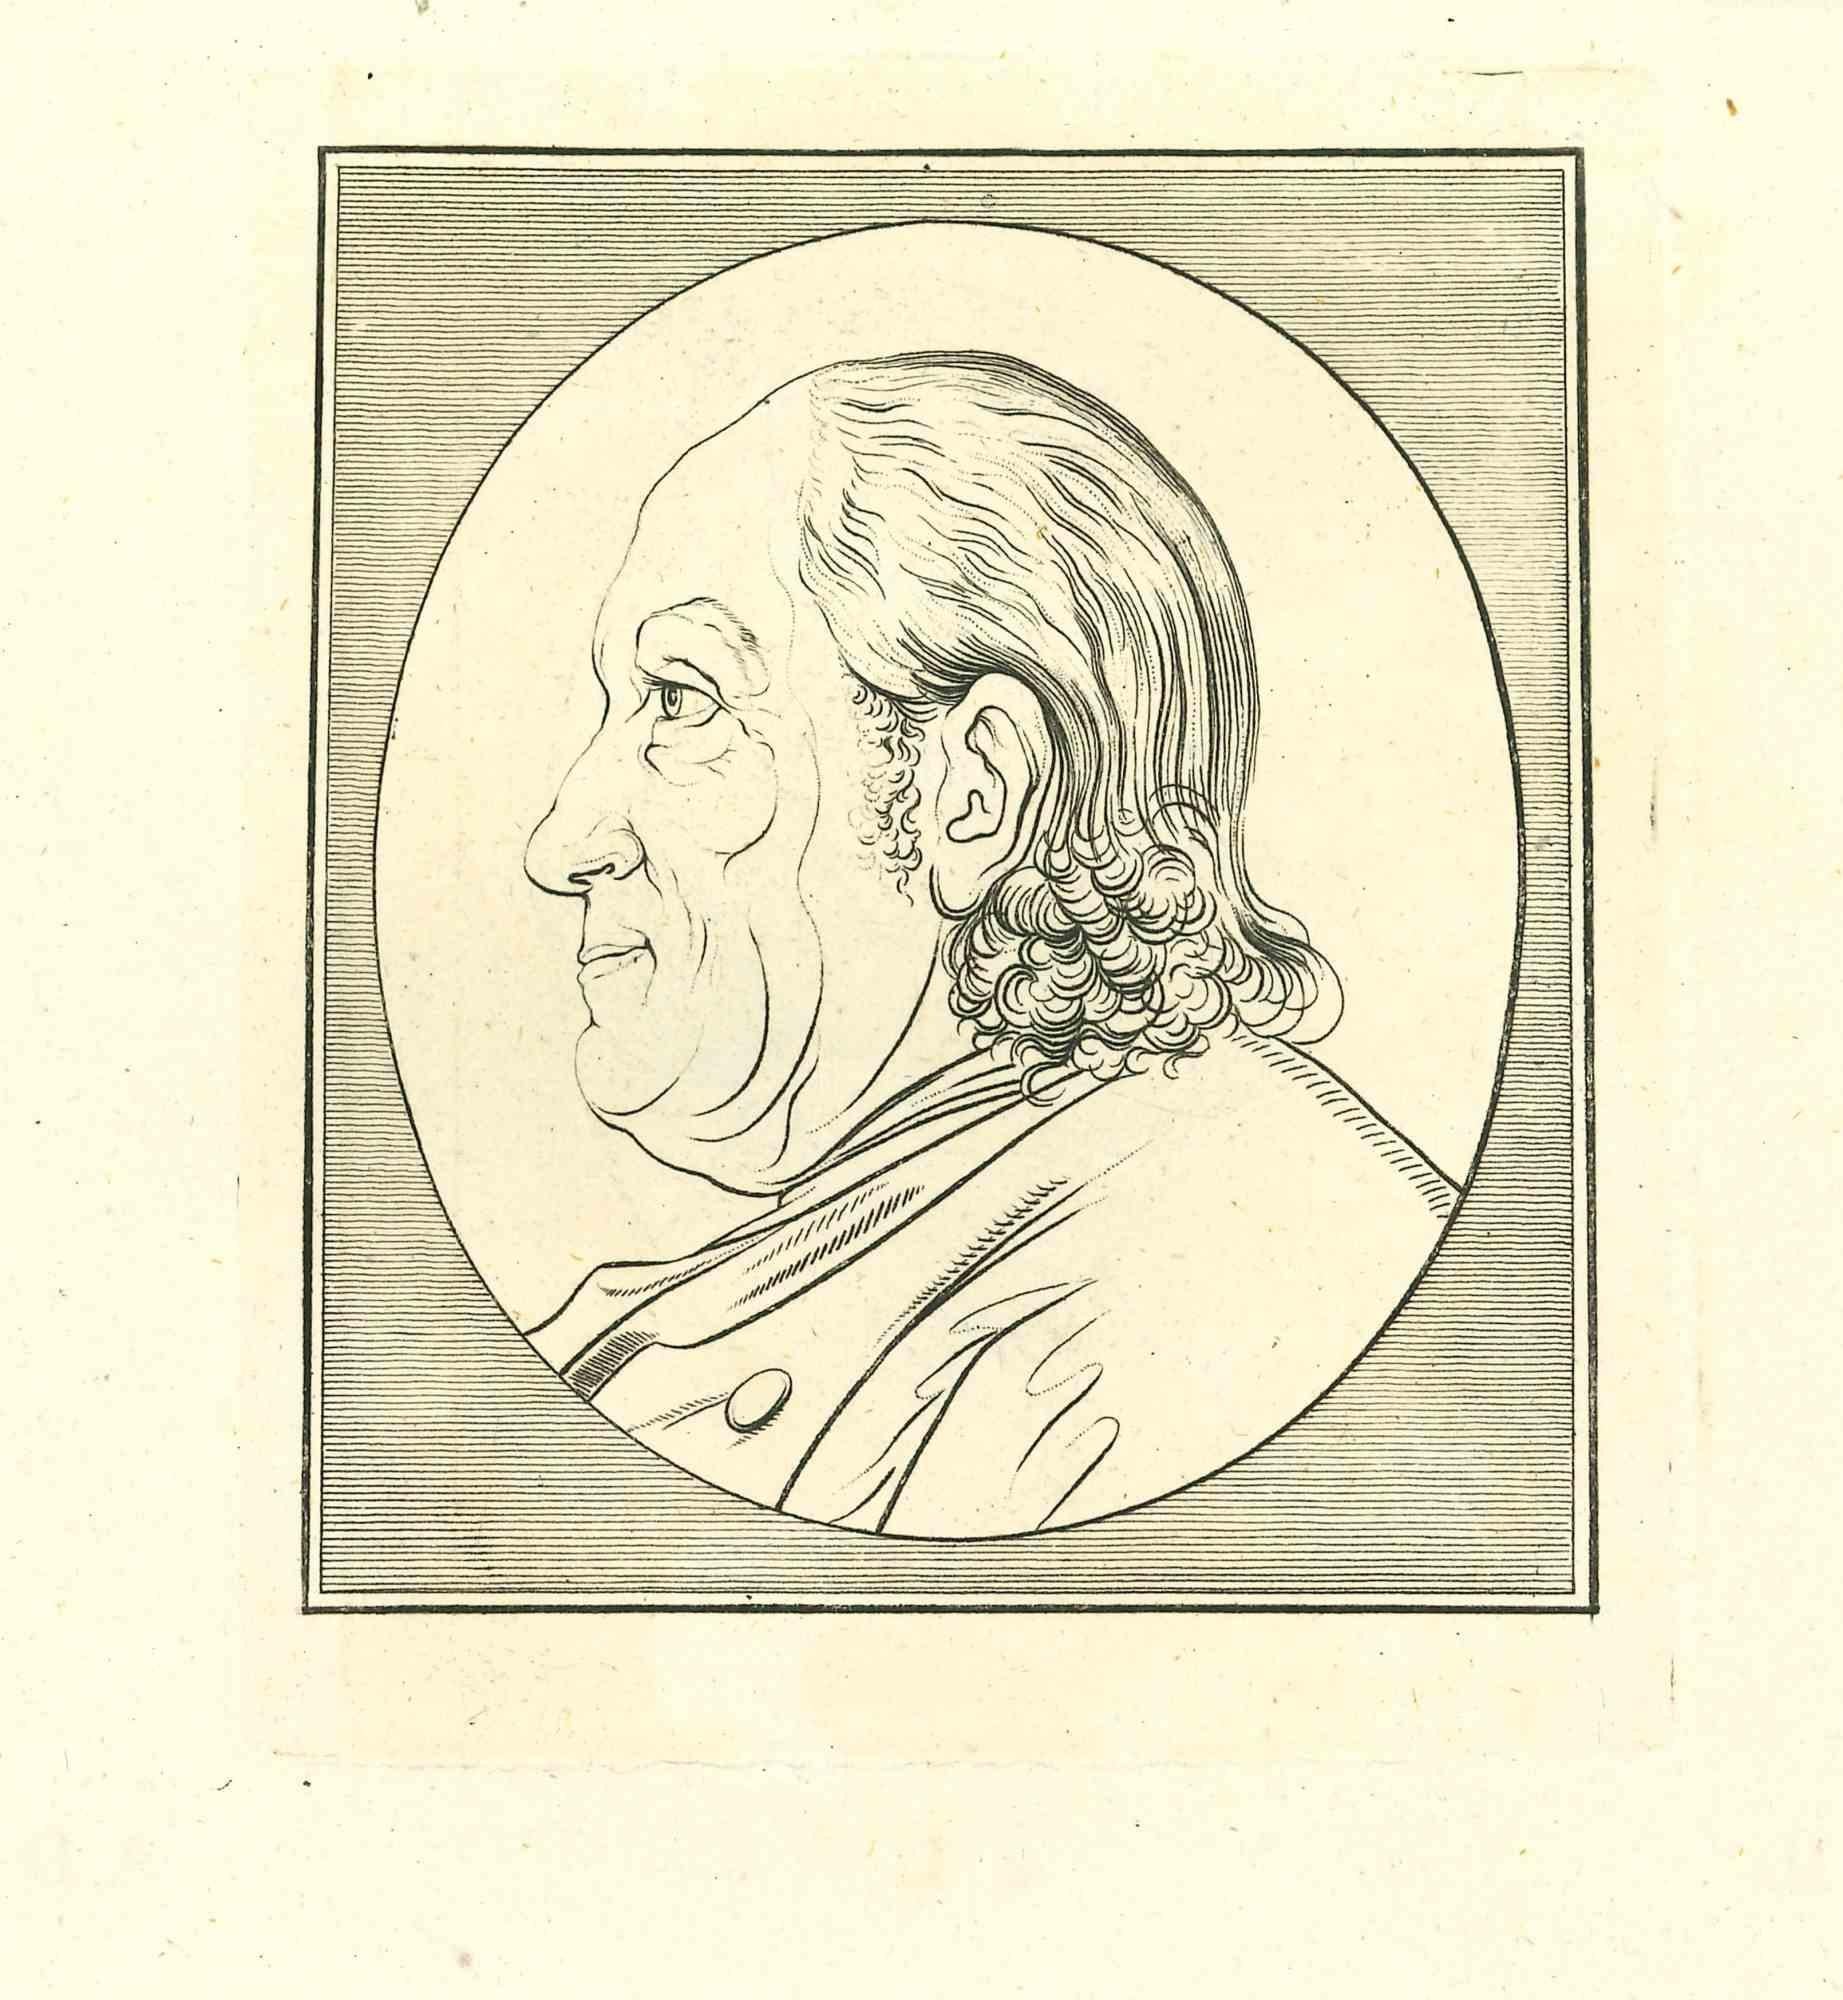 The Profile is an original etching artwork realized by Thomas Holloway for Johann Caspar Lavater's "Essays on Physiognomy, Designed to Promote the Knowledge and the Love of Mankind", London, Bensley, 1810. 

With the image of another etching "The